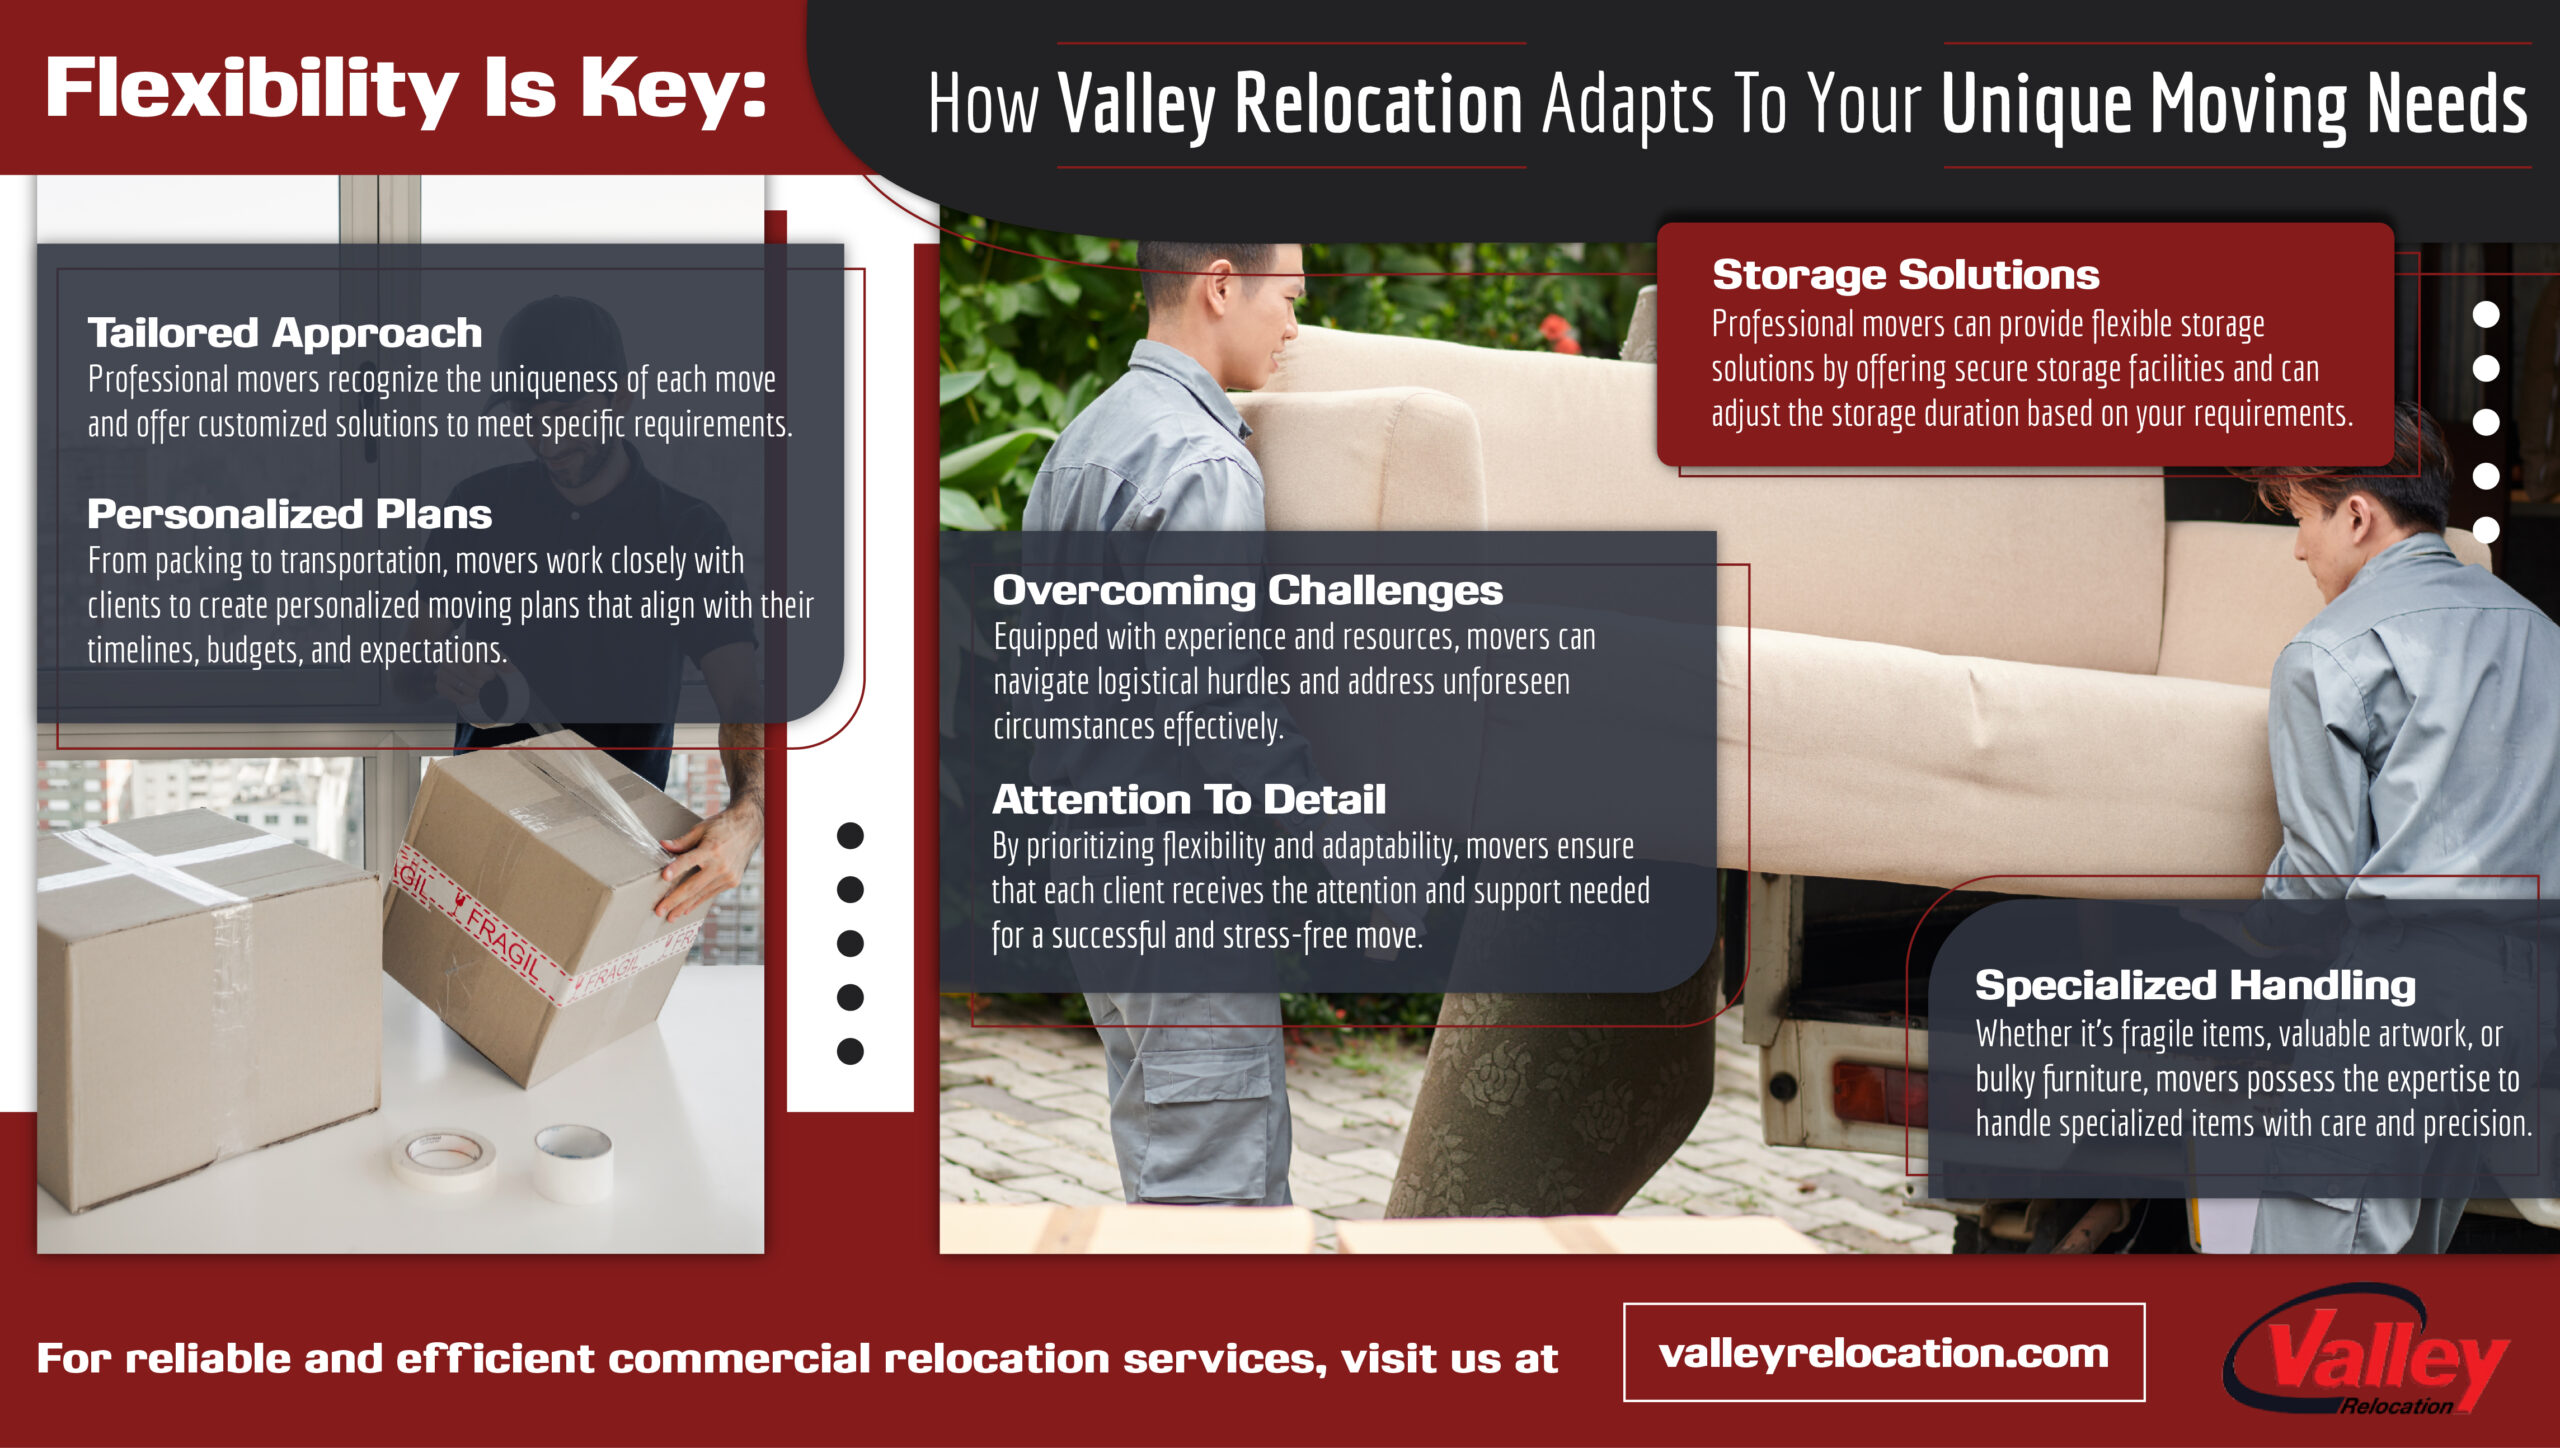 Flexibility Is Key: How Valley Relocation Adapts To Your Unique Moving Needs